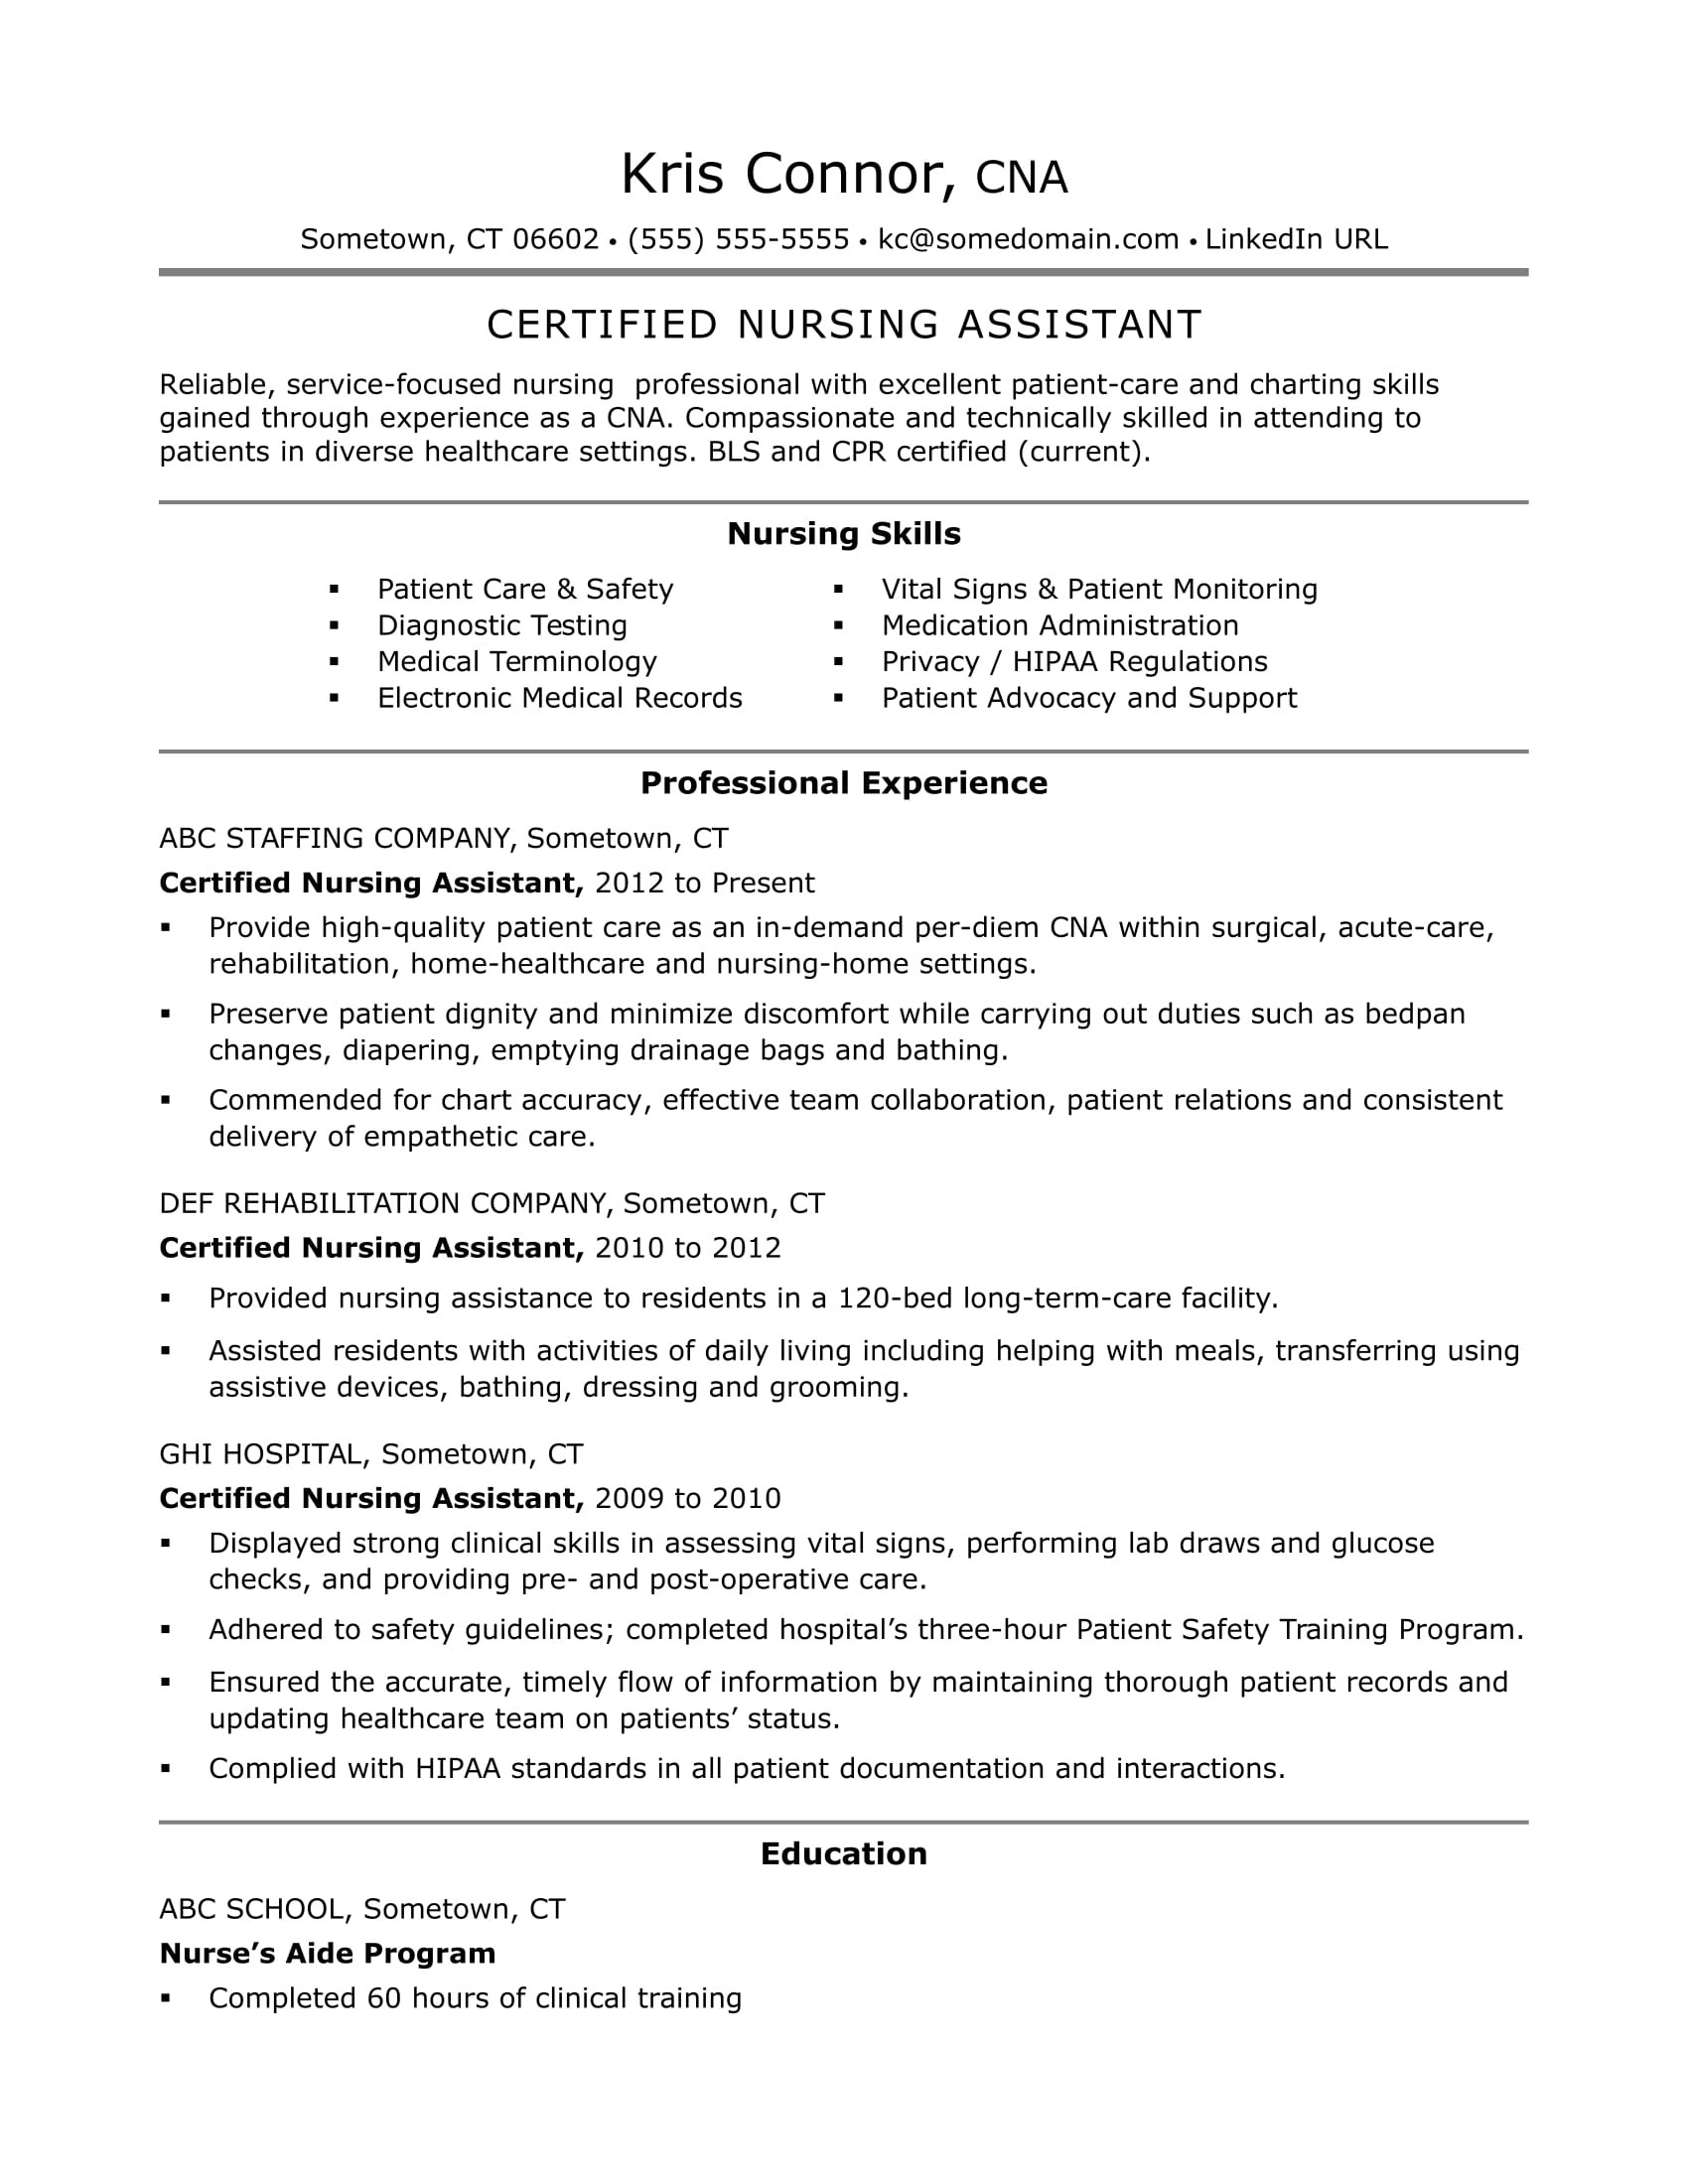 Sample Resume for Health Care assistant In Schools Cna Resume Examples: Skills for Cnas Monster.com